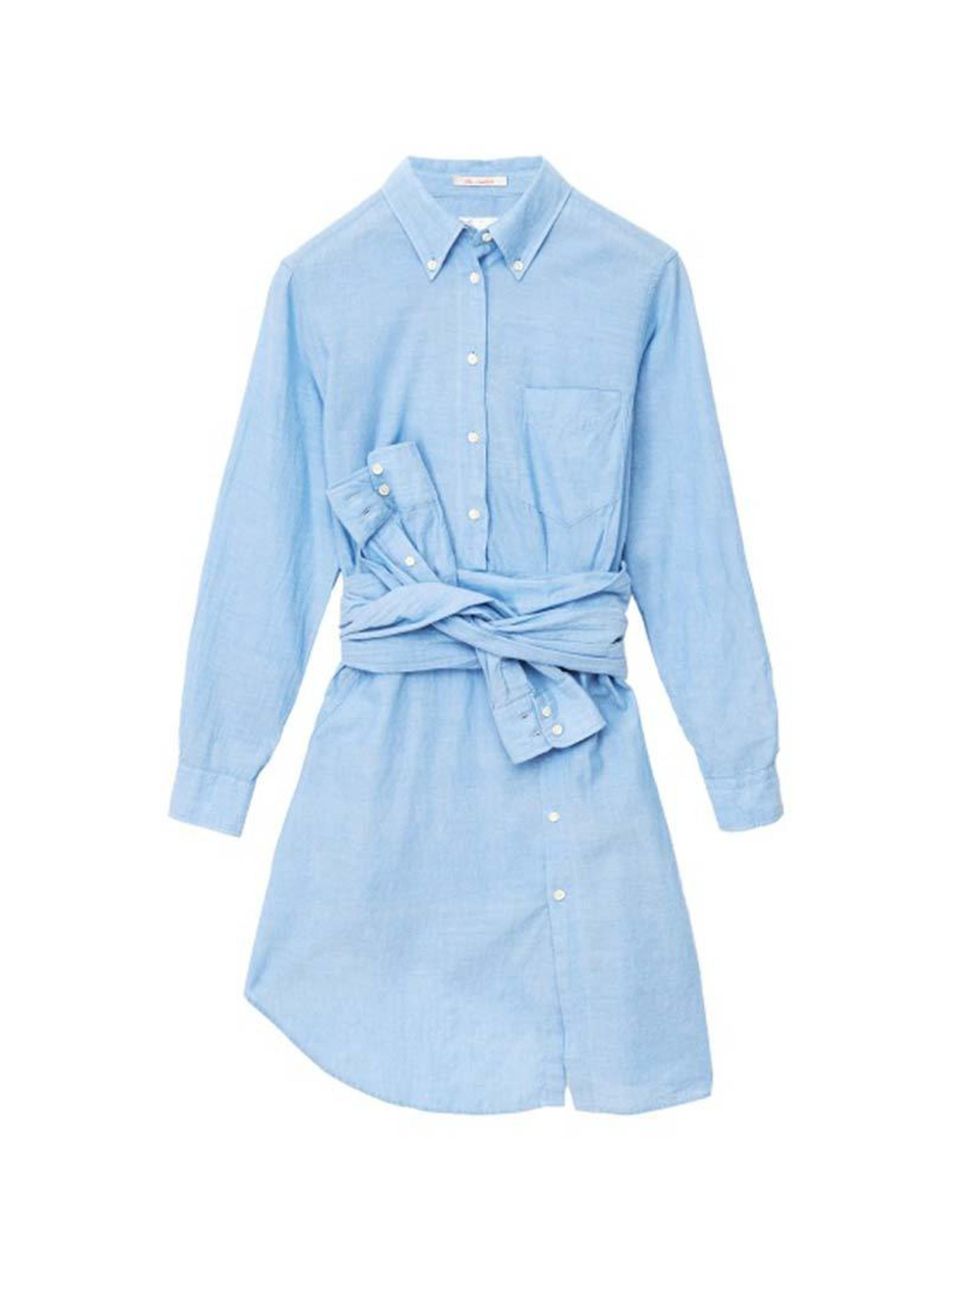 <p>Gant Rugger's first womenswear collection is a corker; Fashion Assistant Charlie Gowans-Eglinton loves this shirt dress with a surreal twist.</p>

<p> </p>

<p><a href="http://www.gant.co.uk/womens-dresses/blue-the-smille-dress/31407" target="_blank">G